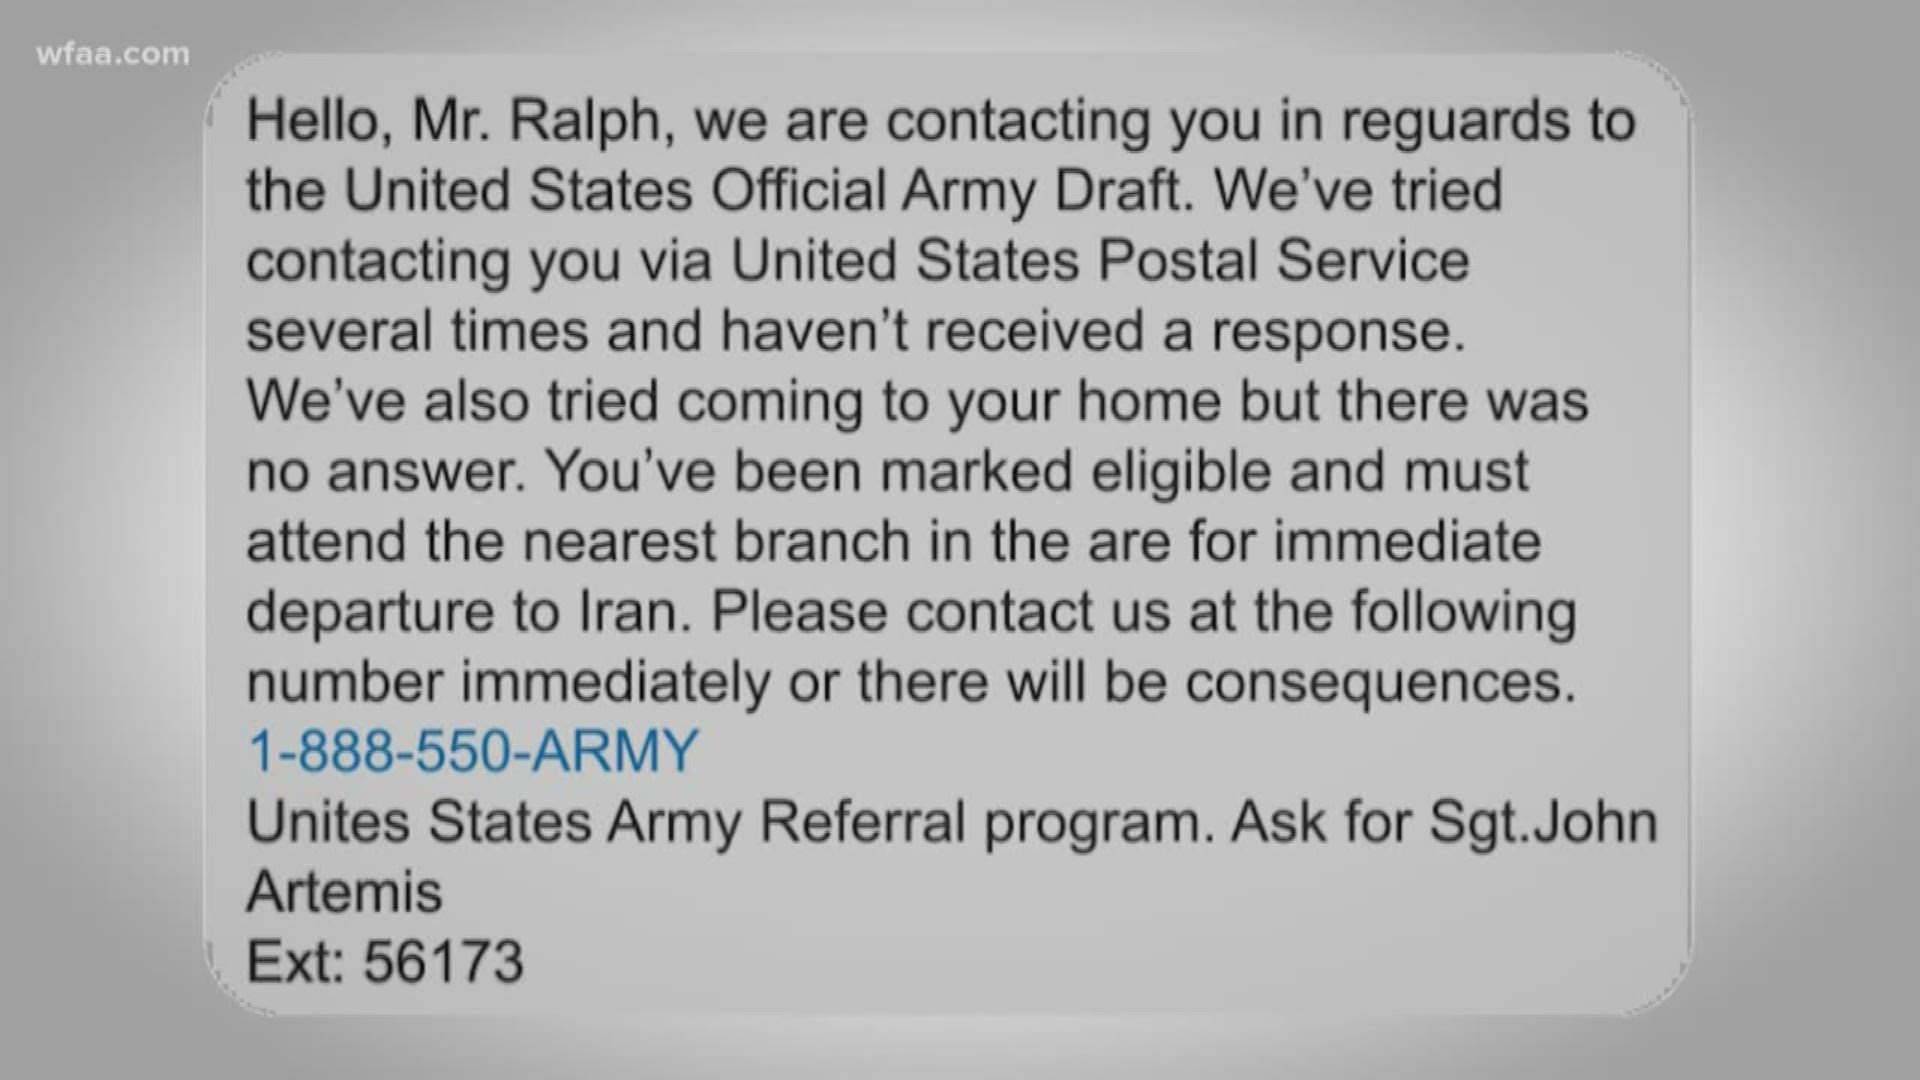 us-army-warns-about-fake-text-messages-regarding-a-draft-wfaa